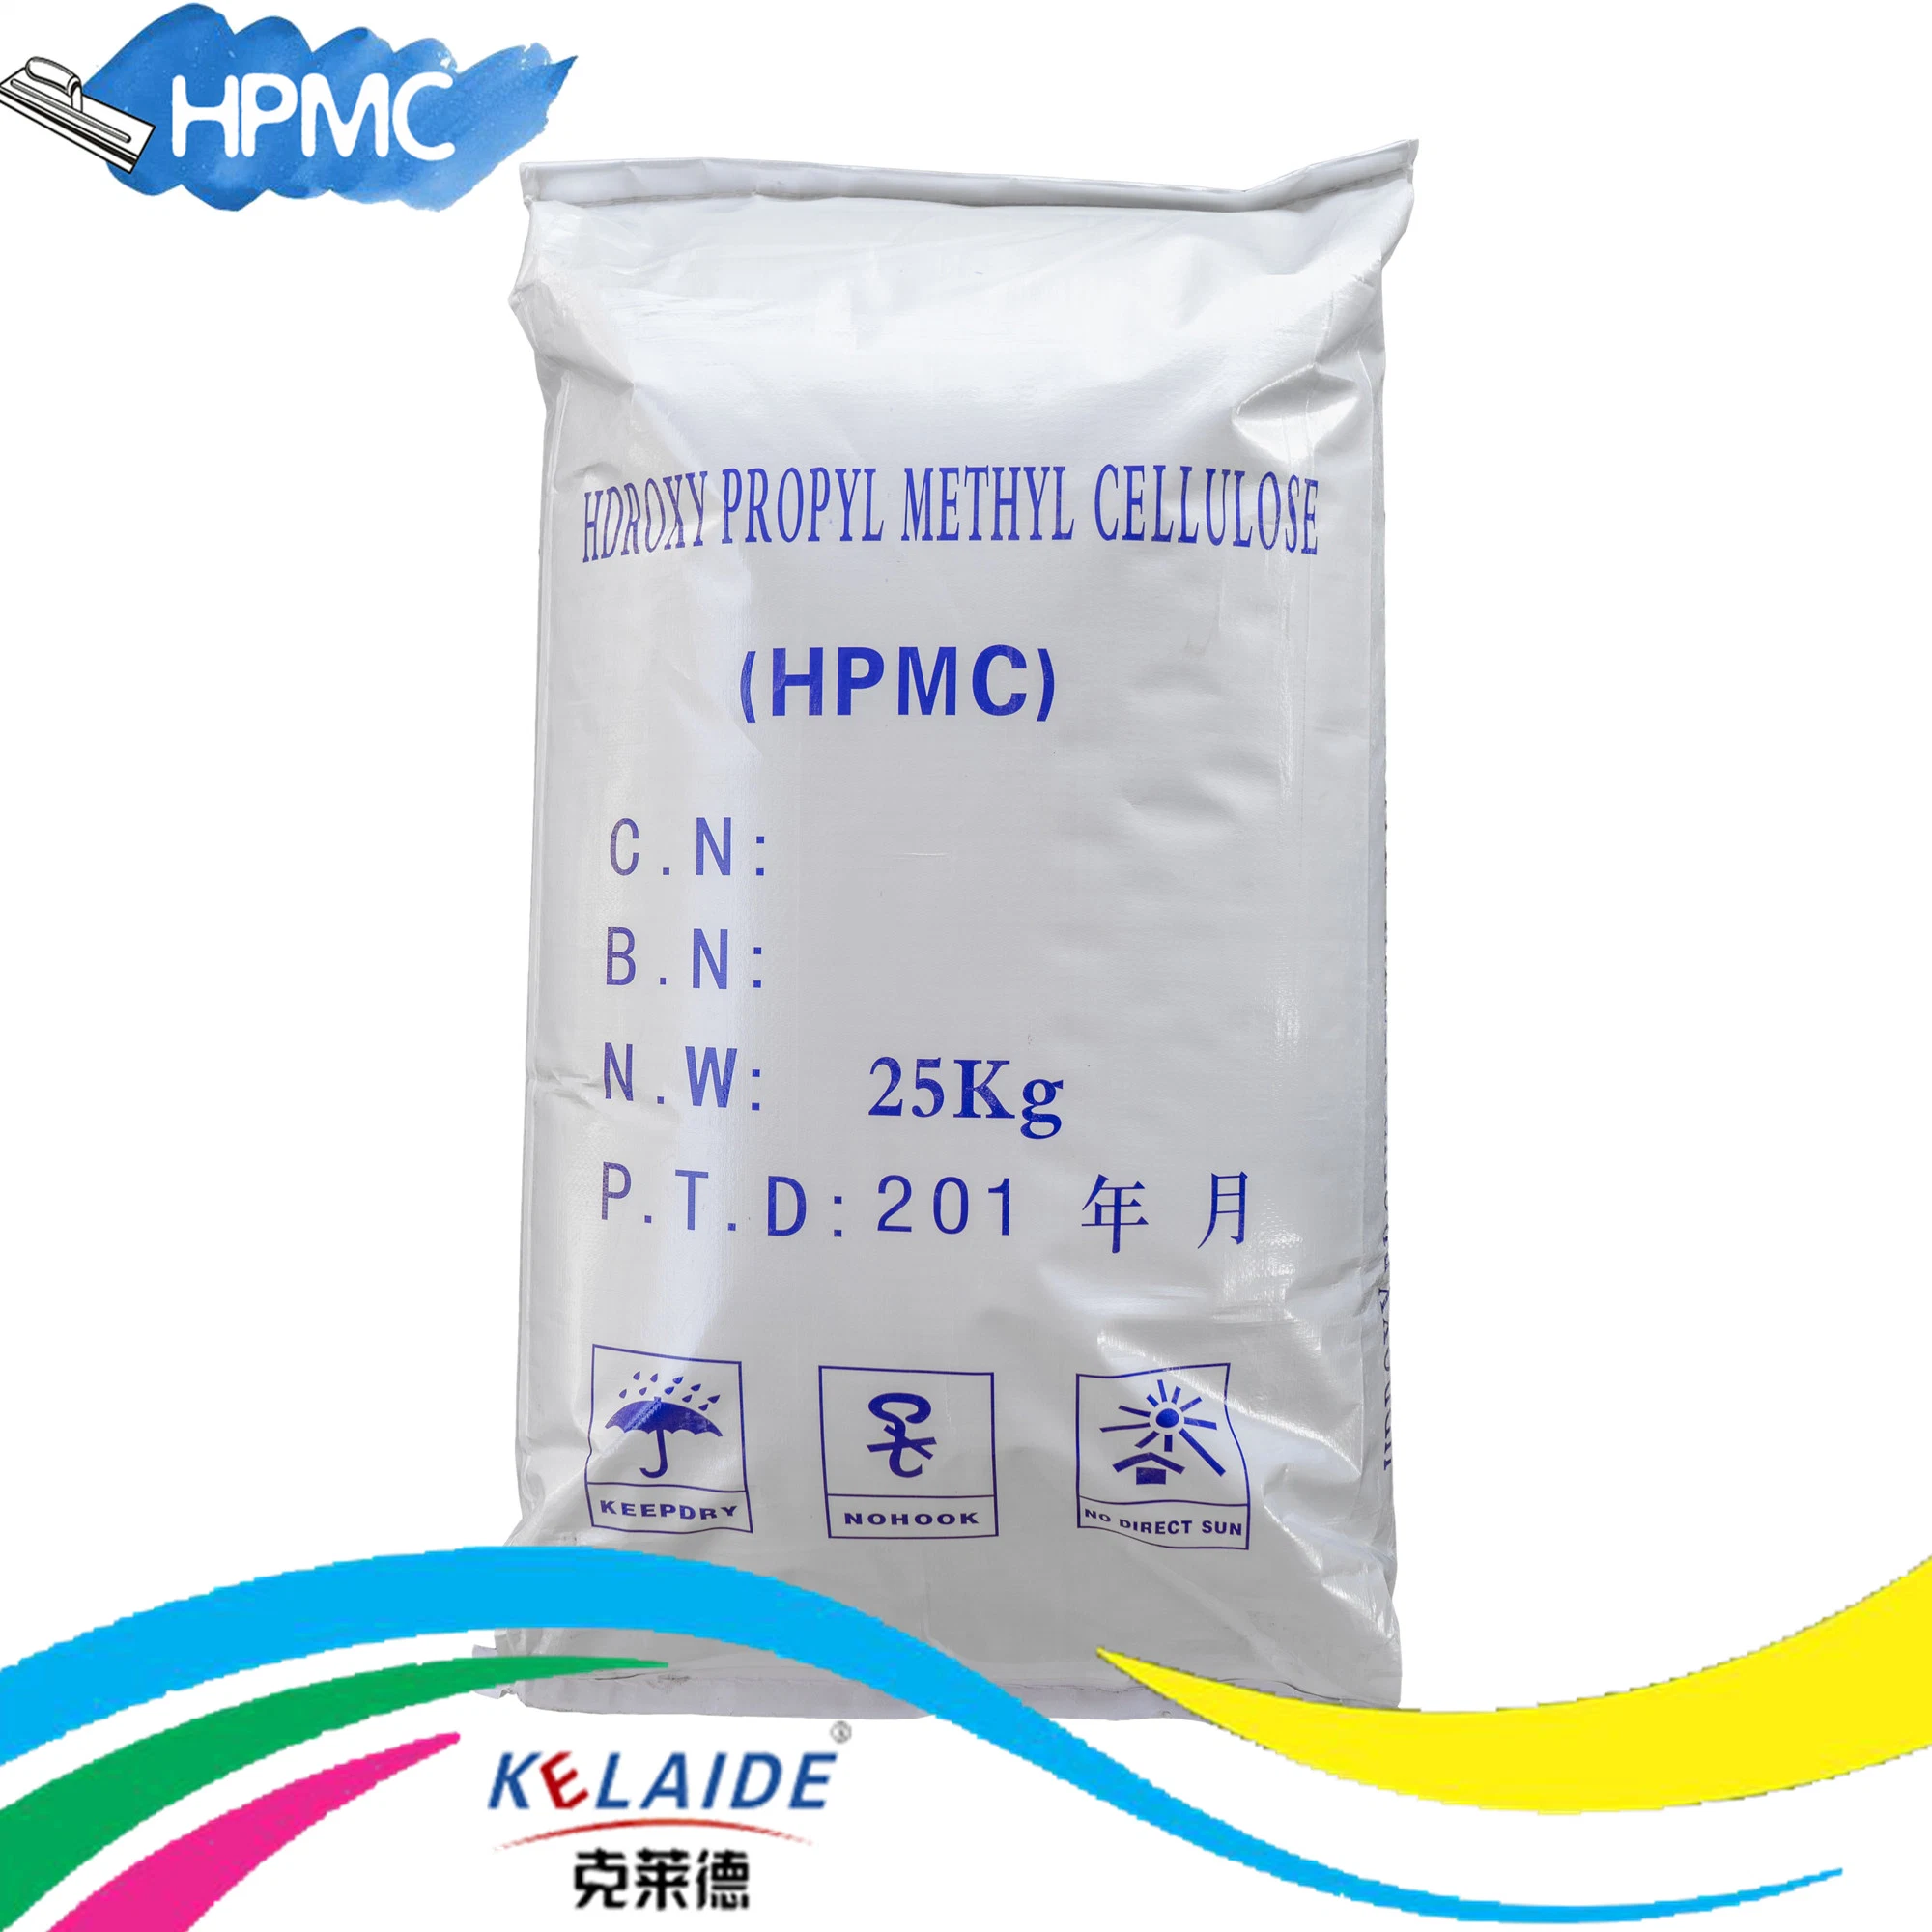 Used in Mortar, Cement Plaster, Wall Putty, Pigment Cellulose Ether Hydroxypropyl Methyl Cellulose HPMC Chemical Additives